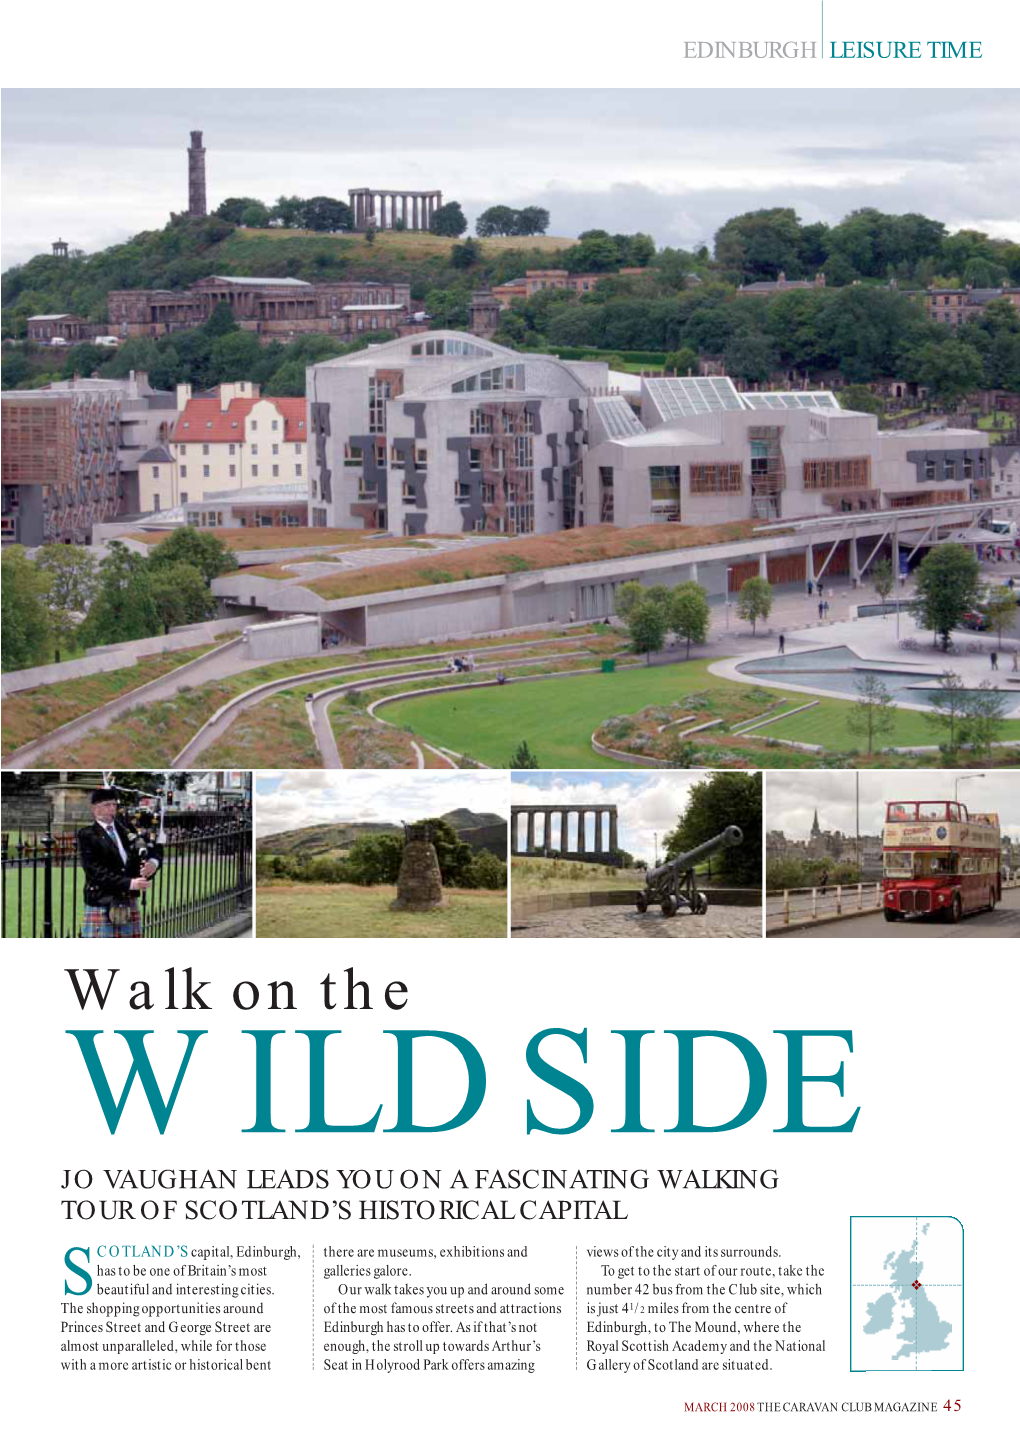 Walk on the WILDSIDE JO VAUGHAN LEADS YOU on a FASCINATING WALKING TOUR of SCOTLAND’S HISTORICAL CAPITAL